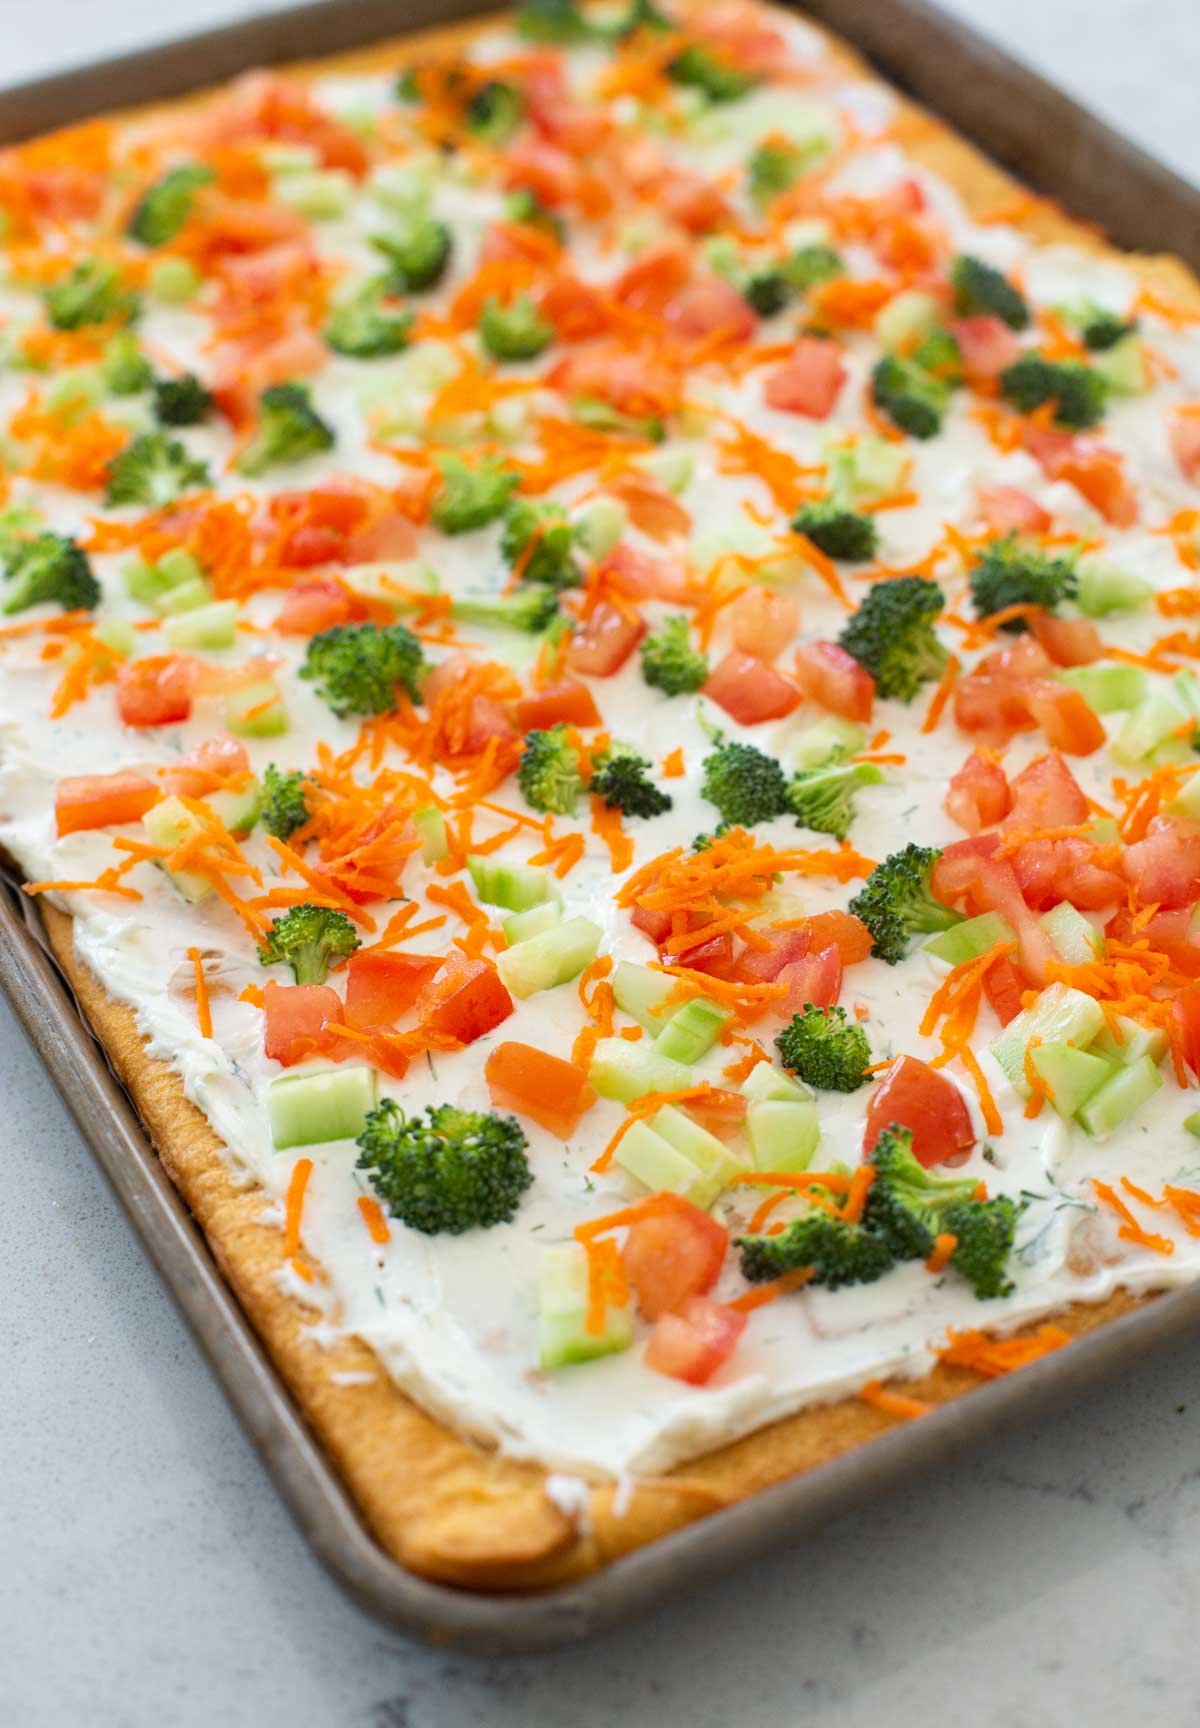 The raw veggie pizza is fully assembled and the vegetables have been gently patted into the cream cheese.